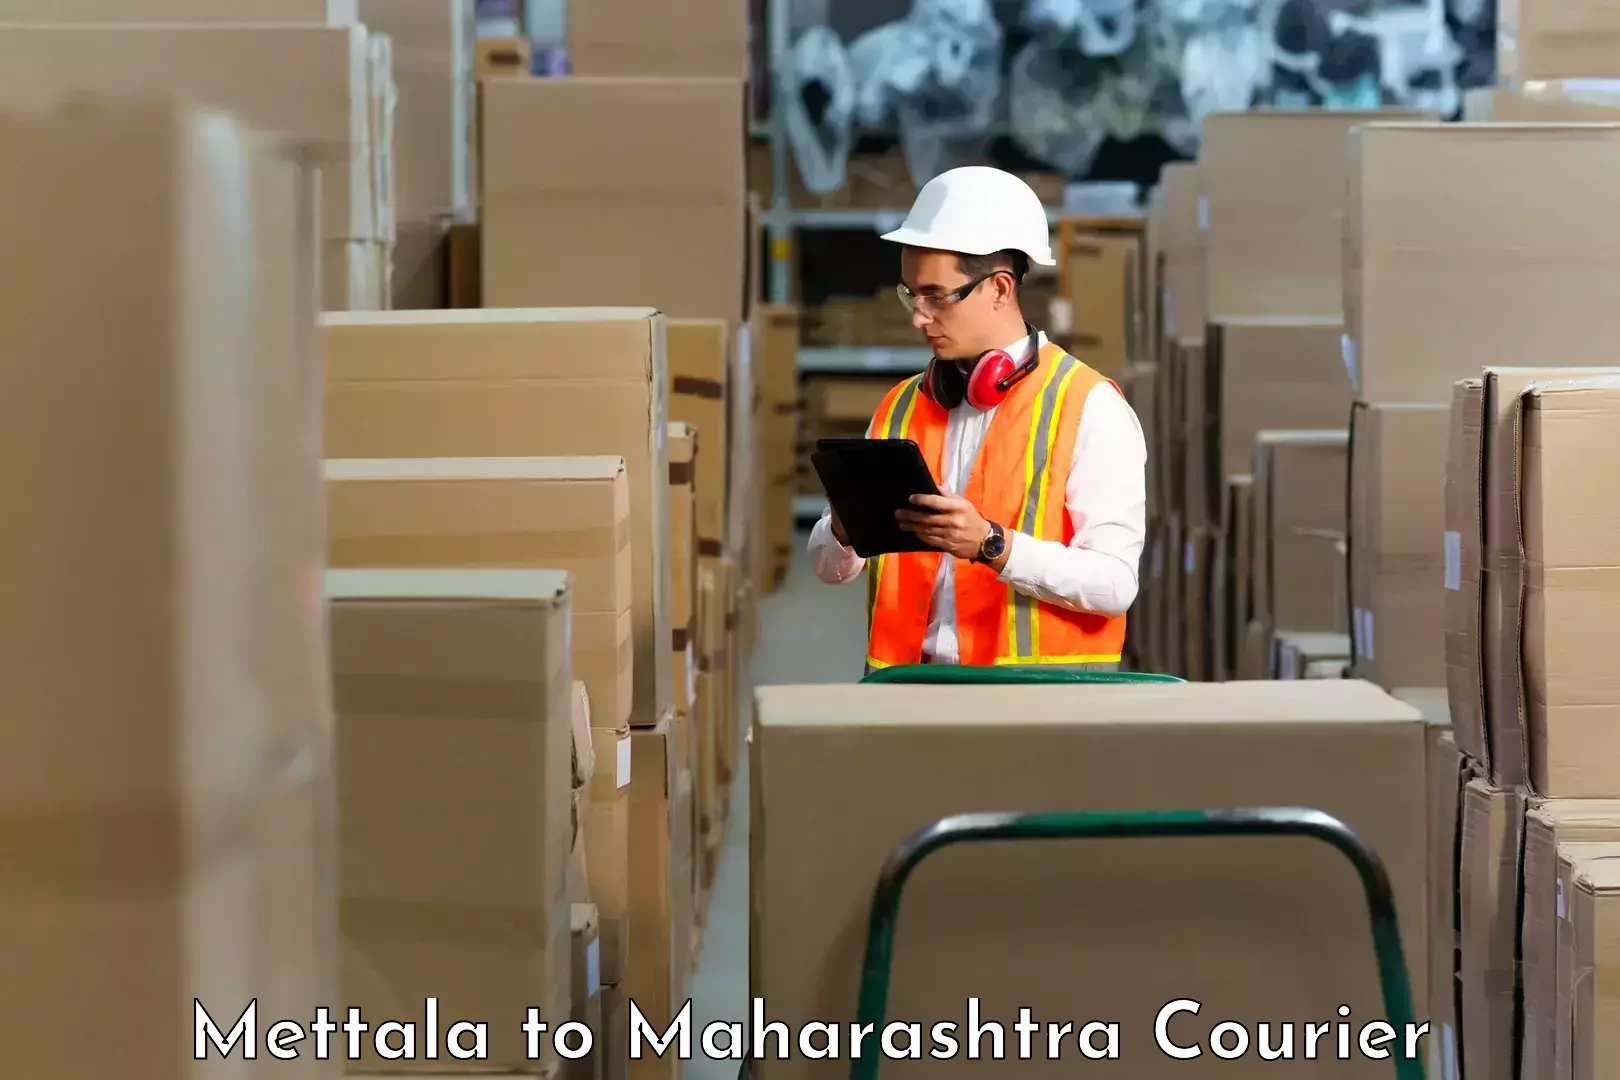 Customer-centric shipping Mettala to Shindkheda